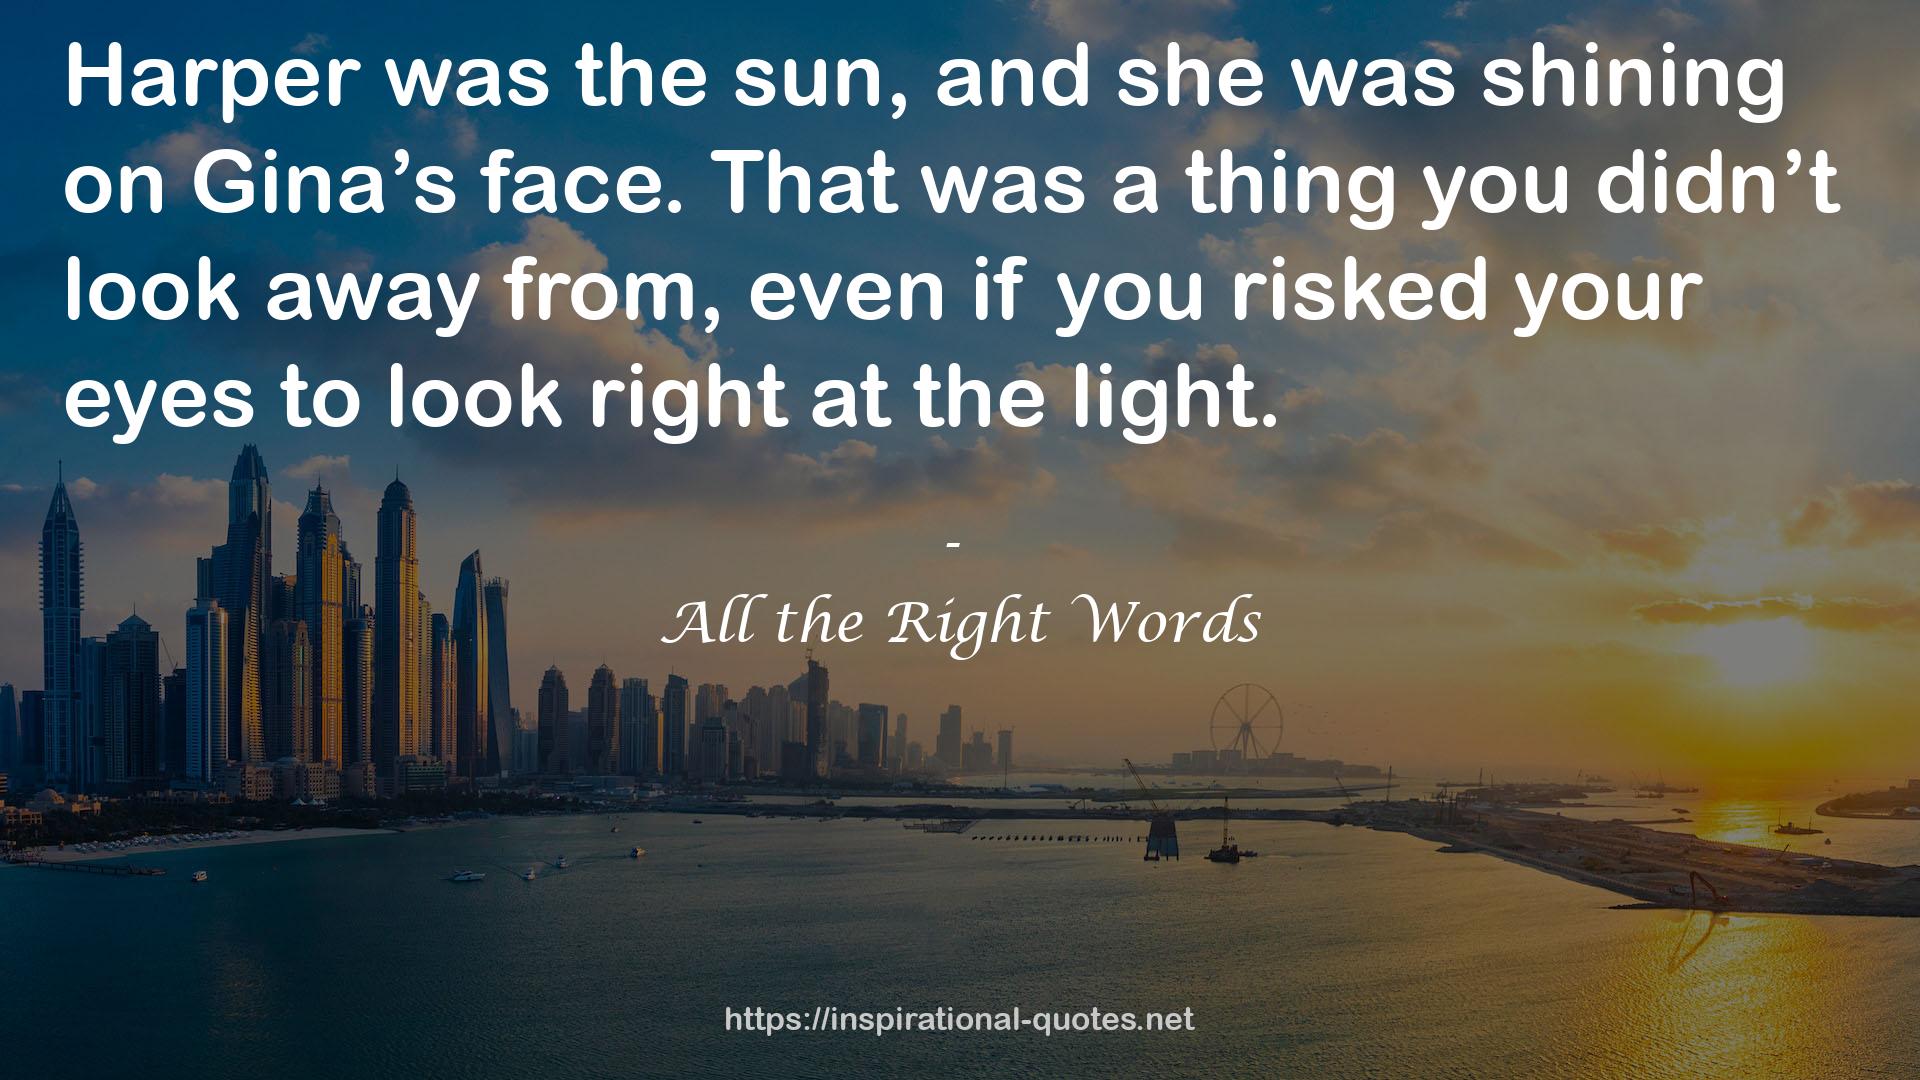 All the Right Words QUOTES